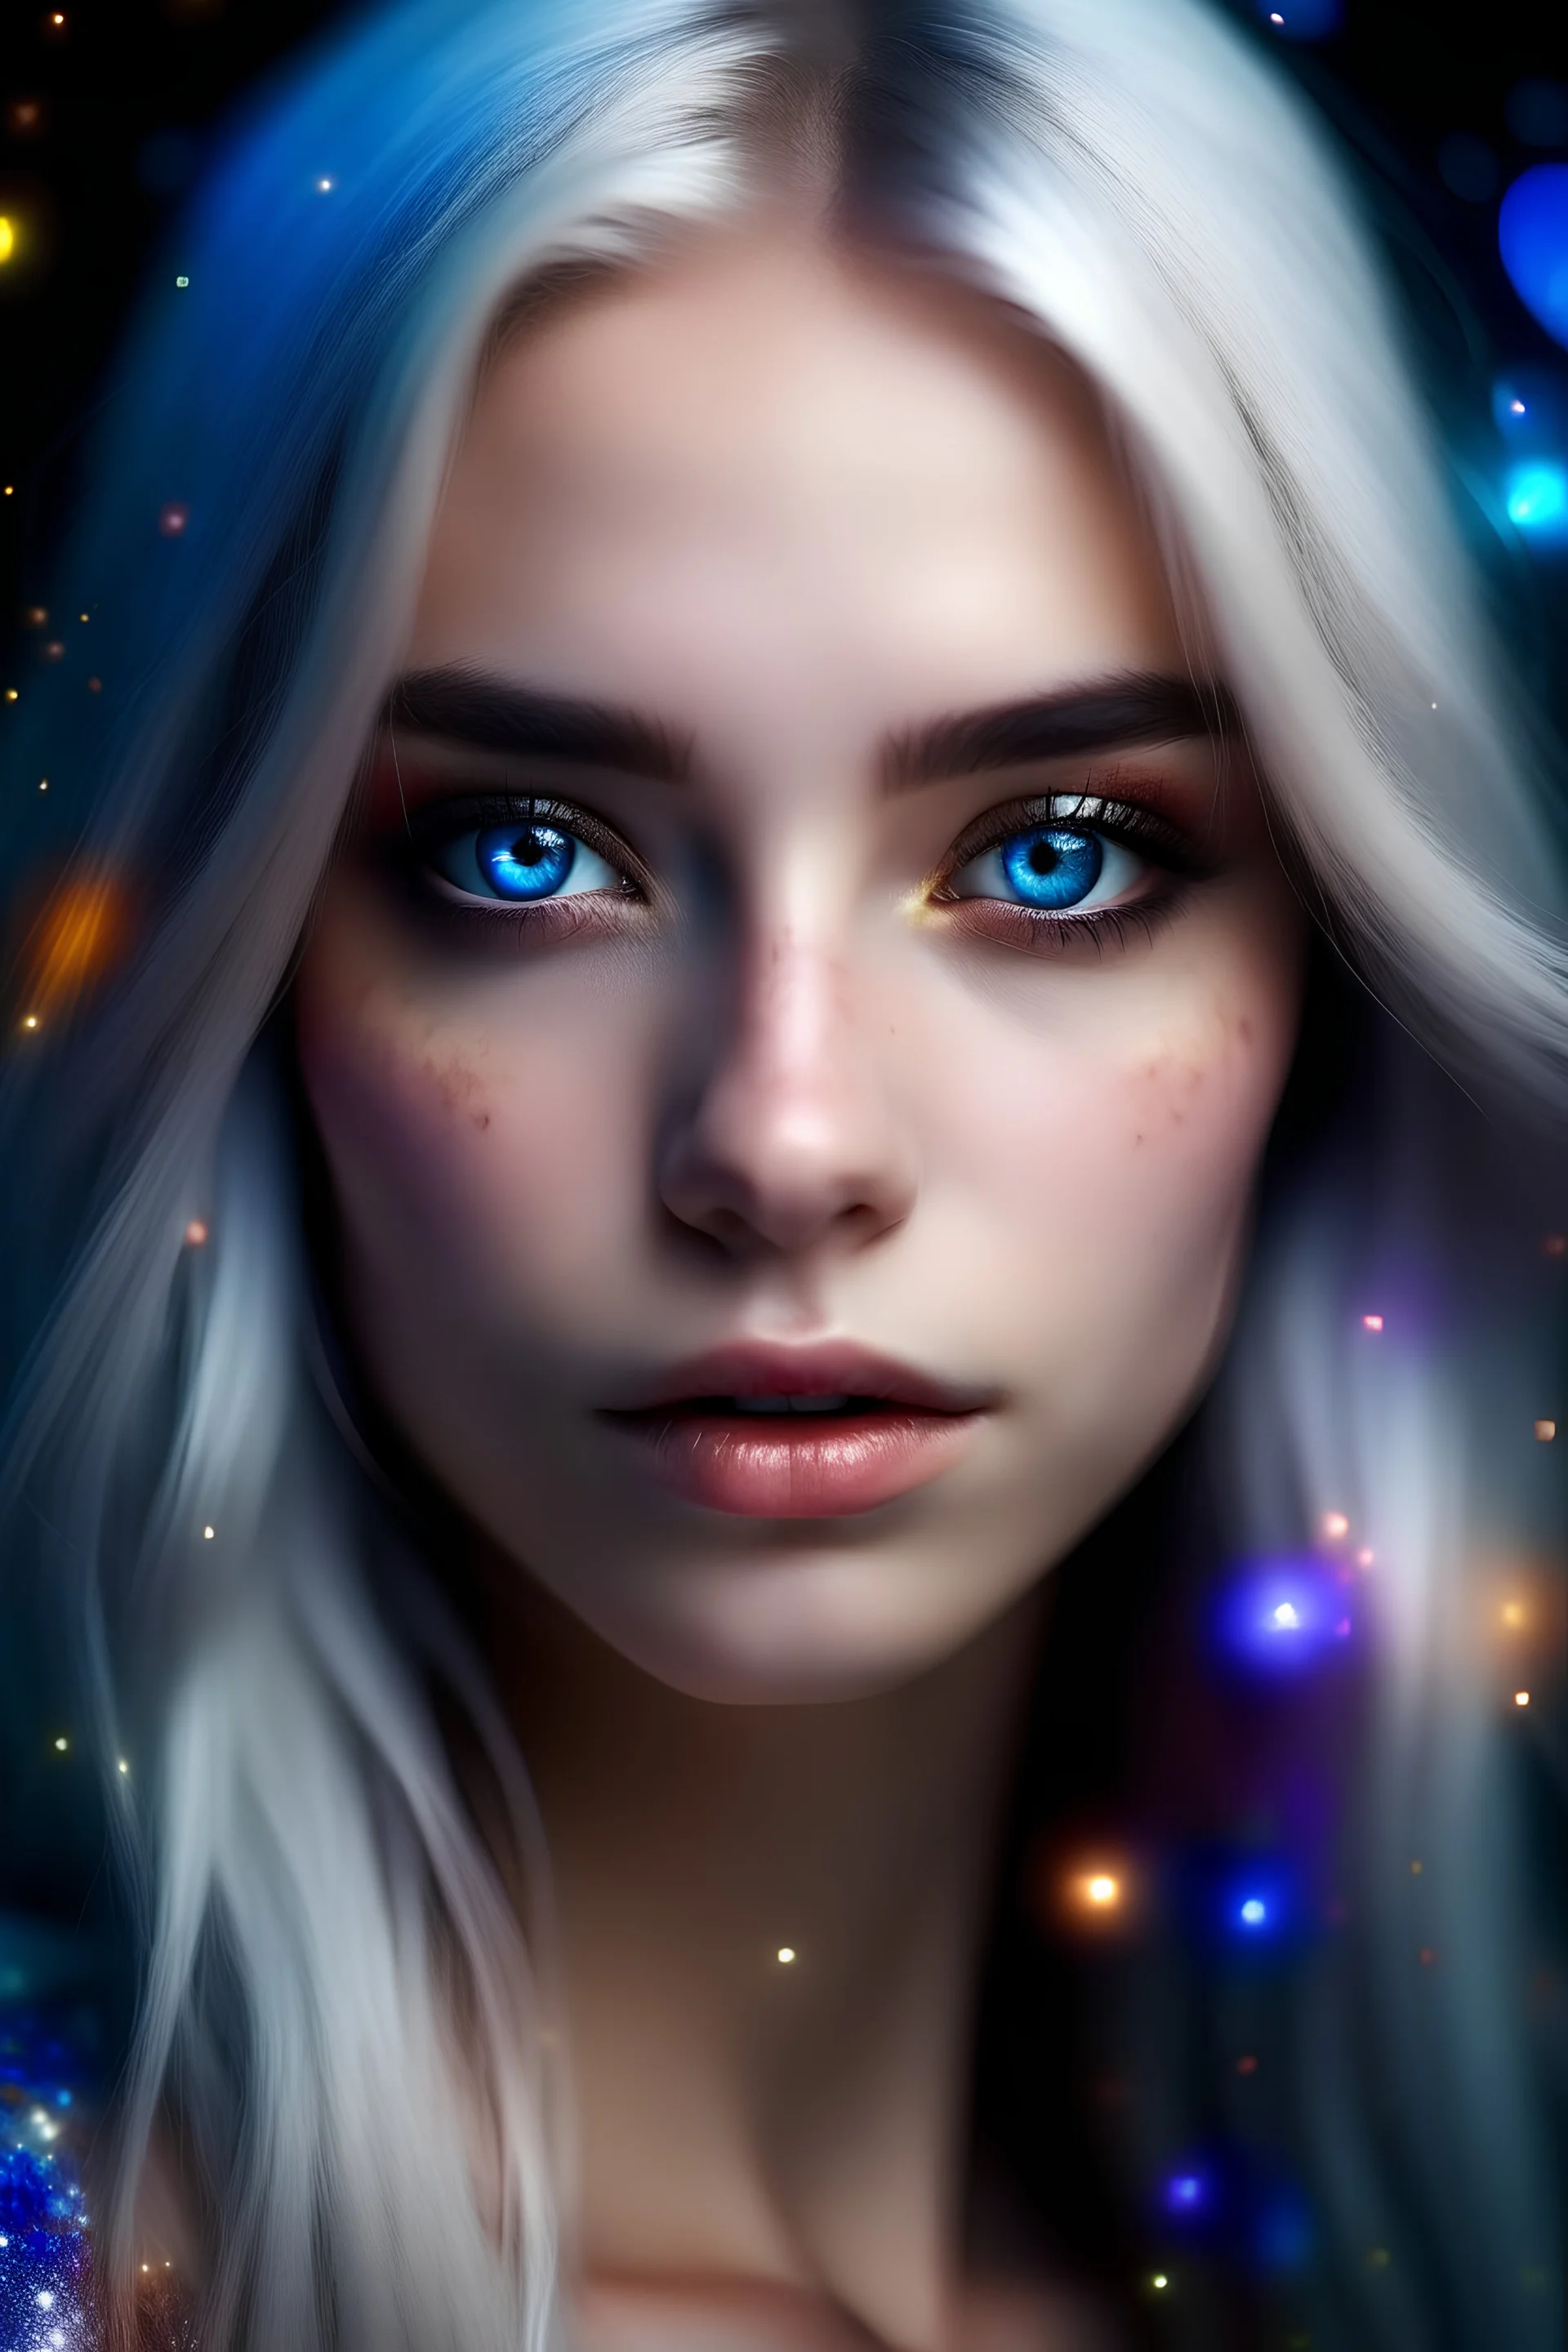 pretty girl, PRETTY EYES, highly detailed face, multicoloured eyes, long white hair, STARS GALAXY background, 4k, high resolution